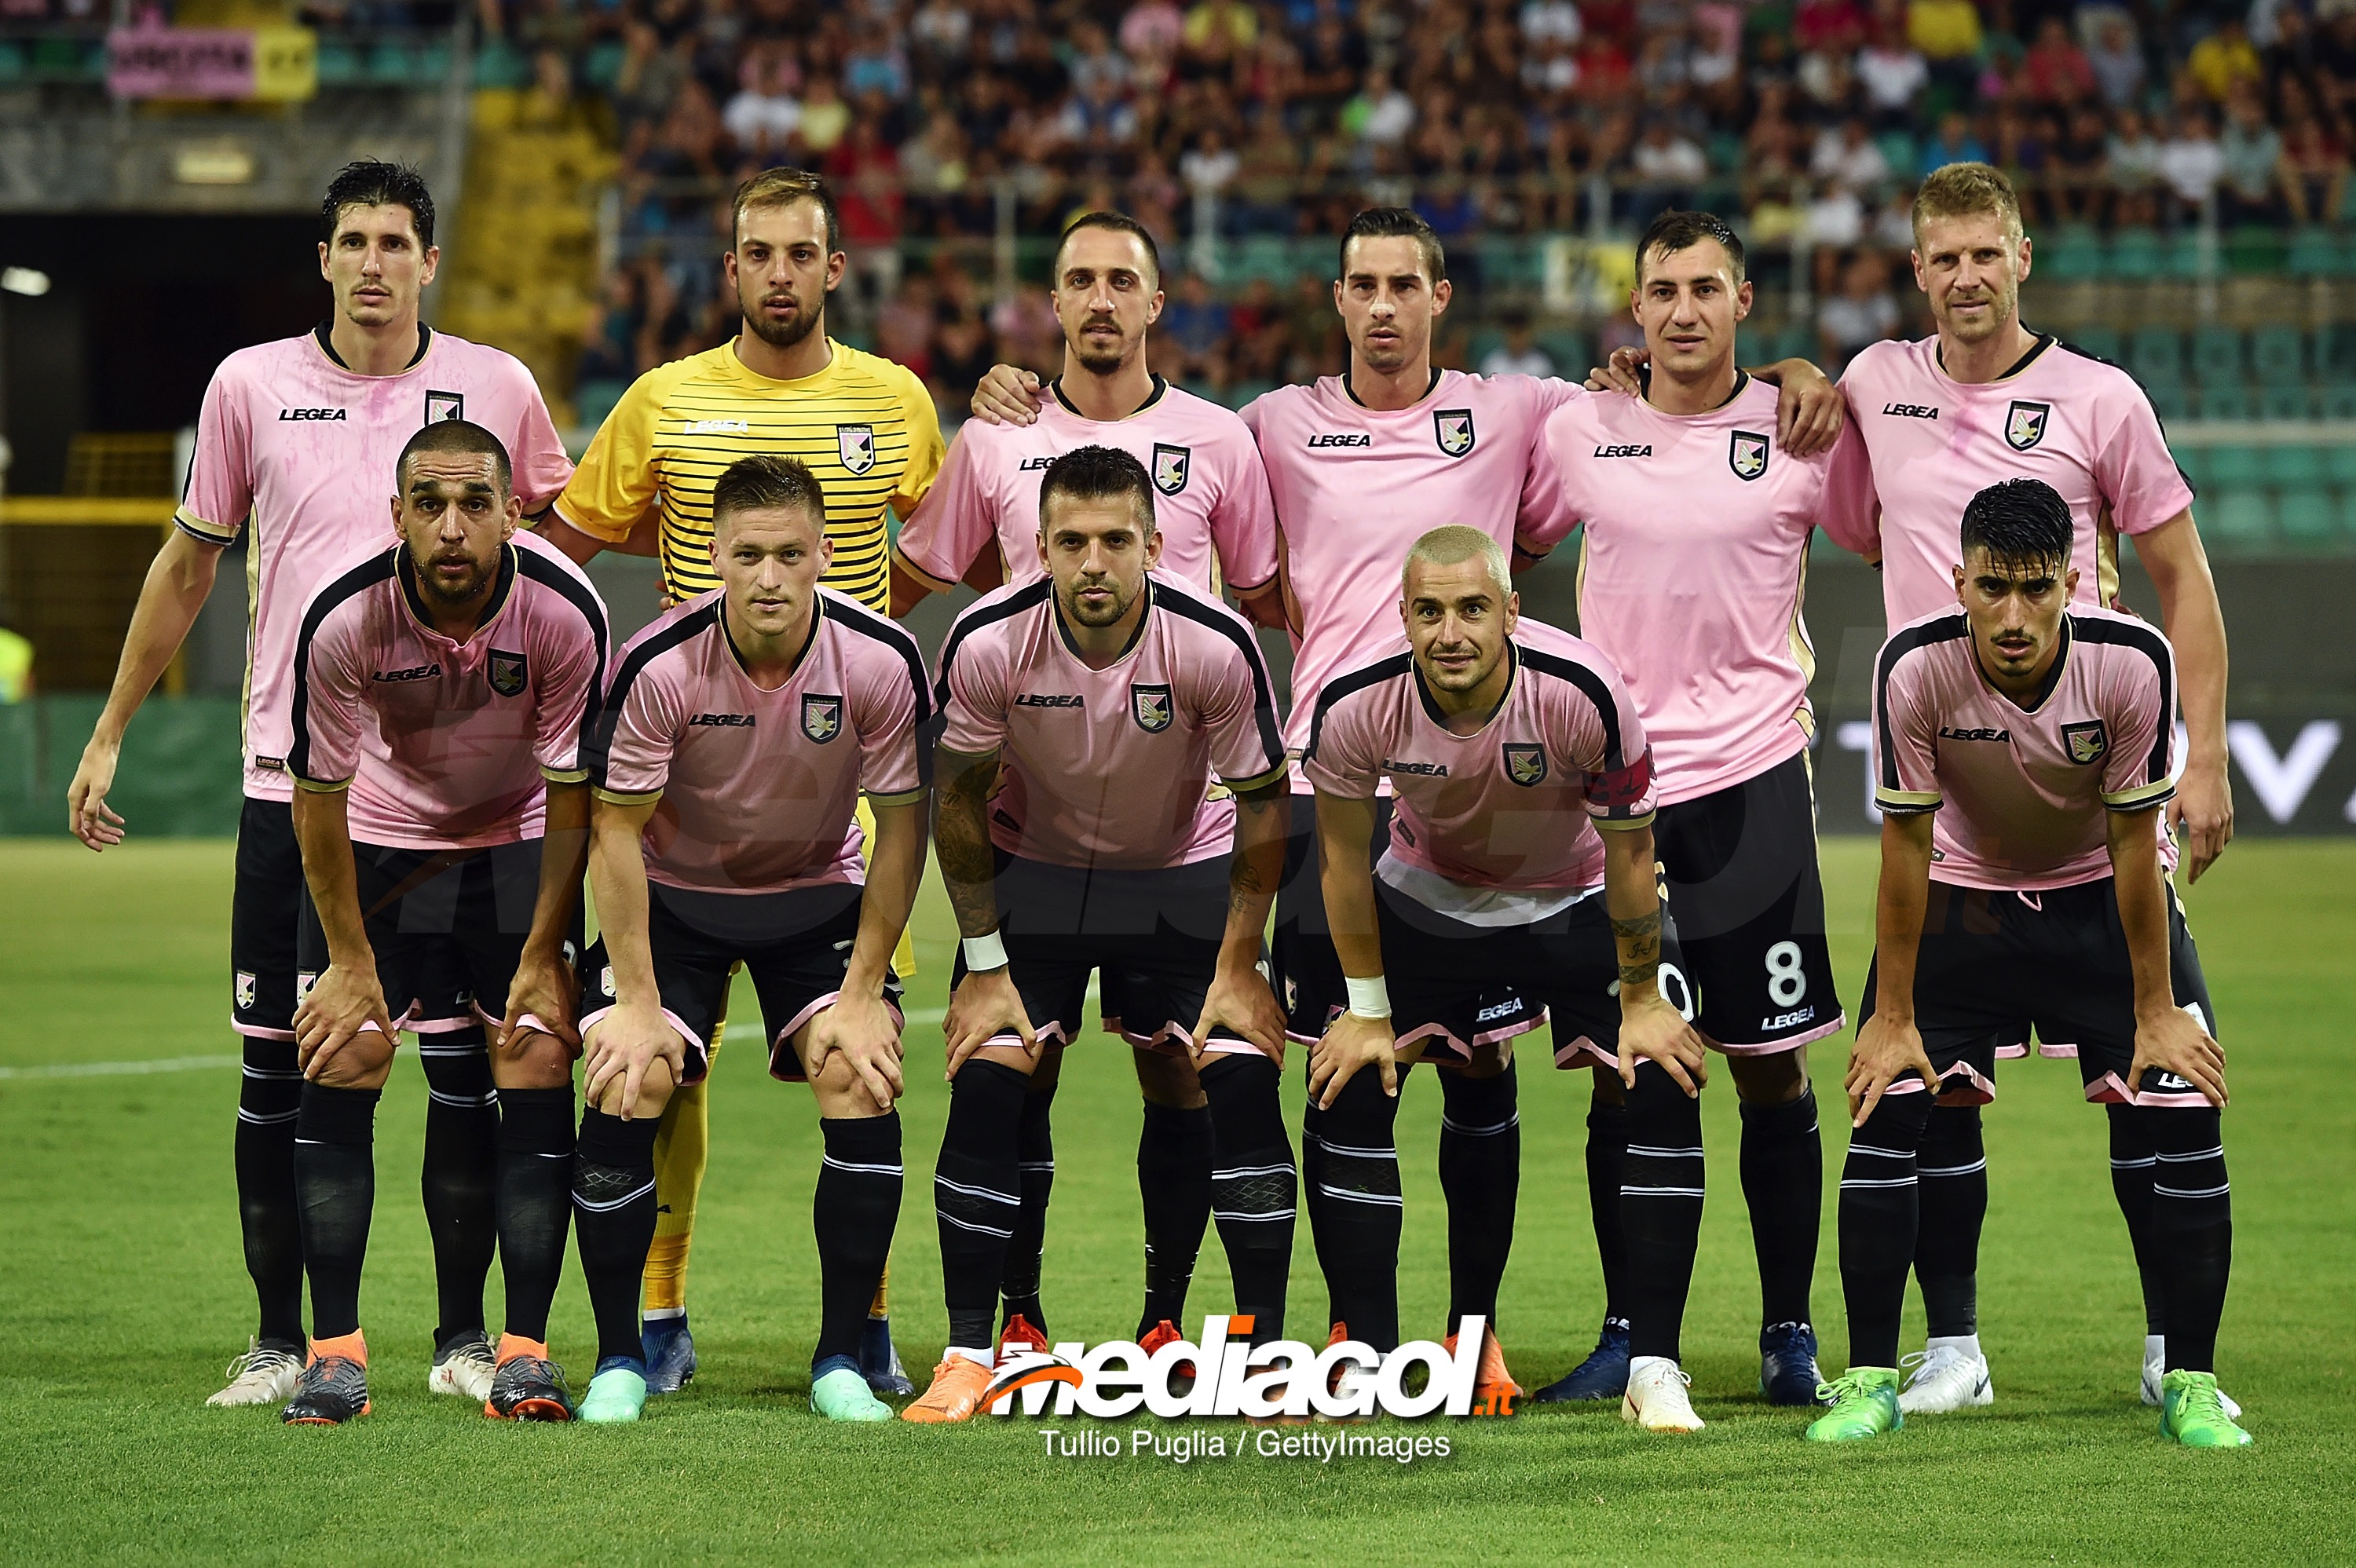 PALERMO, ITALY - AUGUST 05:  Players of Palermo pose for a team shot during the TIM Cup match between US Citta' di Palermo and Vicenza Calcio at Stadio Renzo Barbera on August 5, 2018 in Palermo, Italy.  (Photo by Tullio M. Puglia/Getty Images)